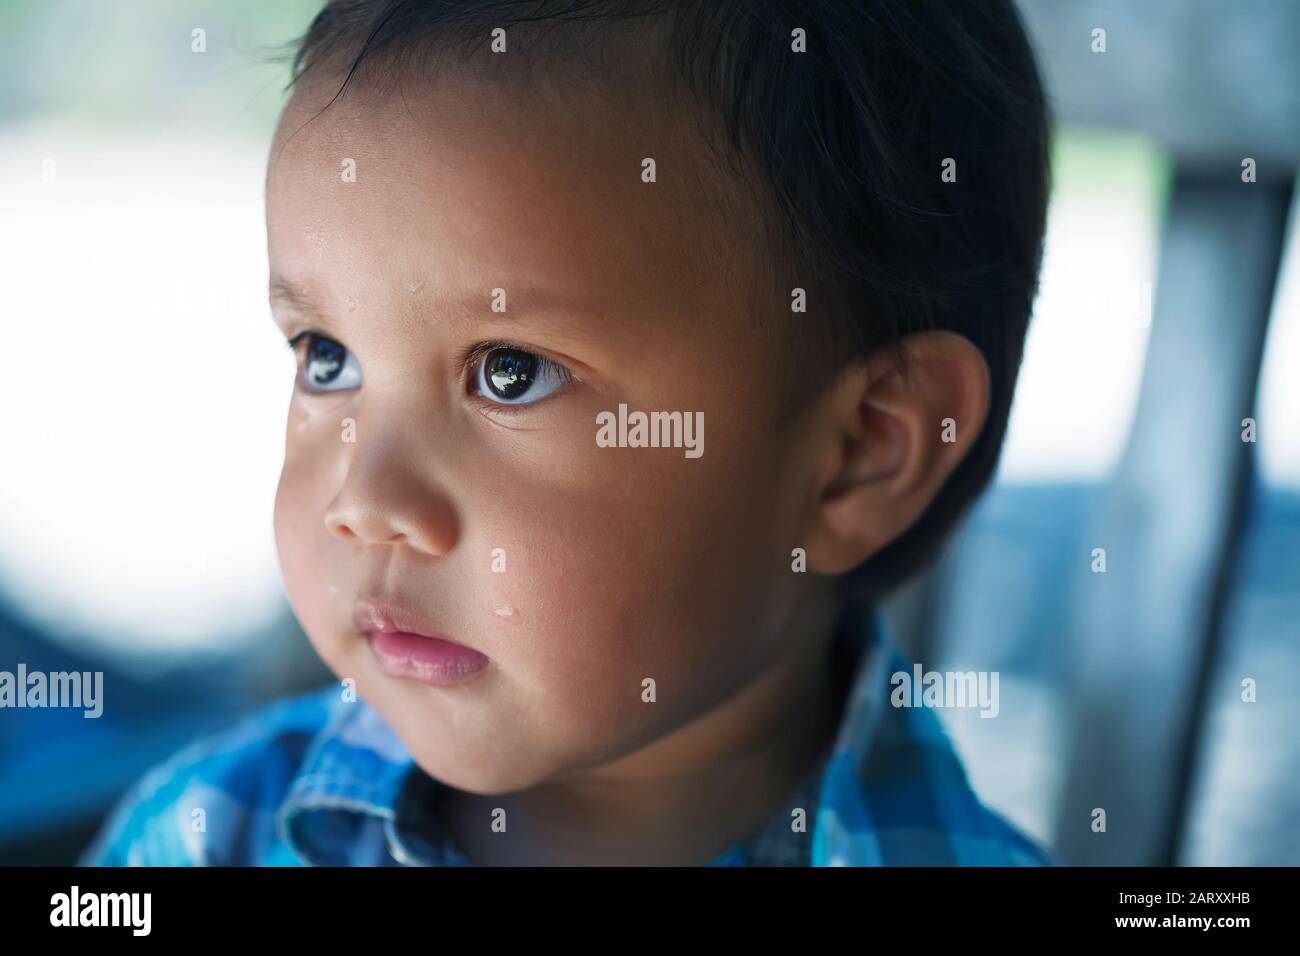 A little boy about two years old who looks sad, teary-eyed, and thoughtful; after crying. Stock Photo